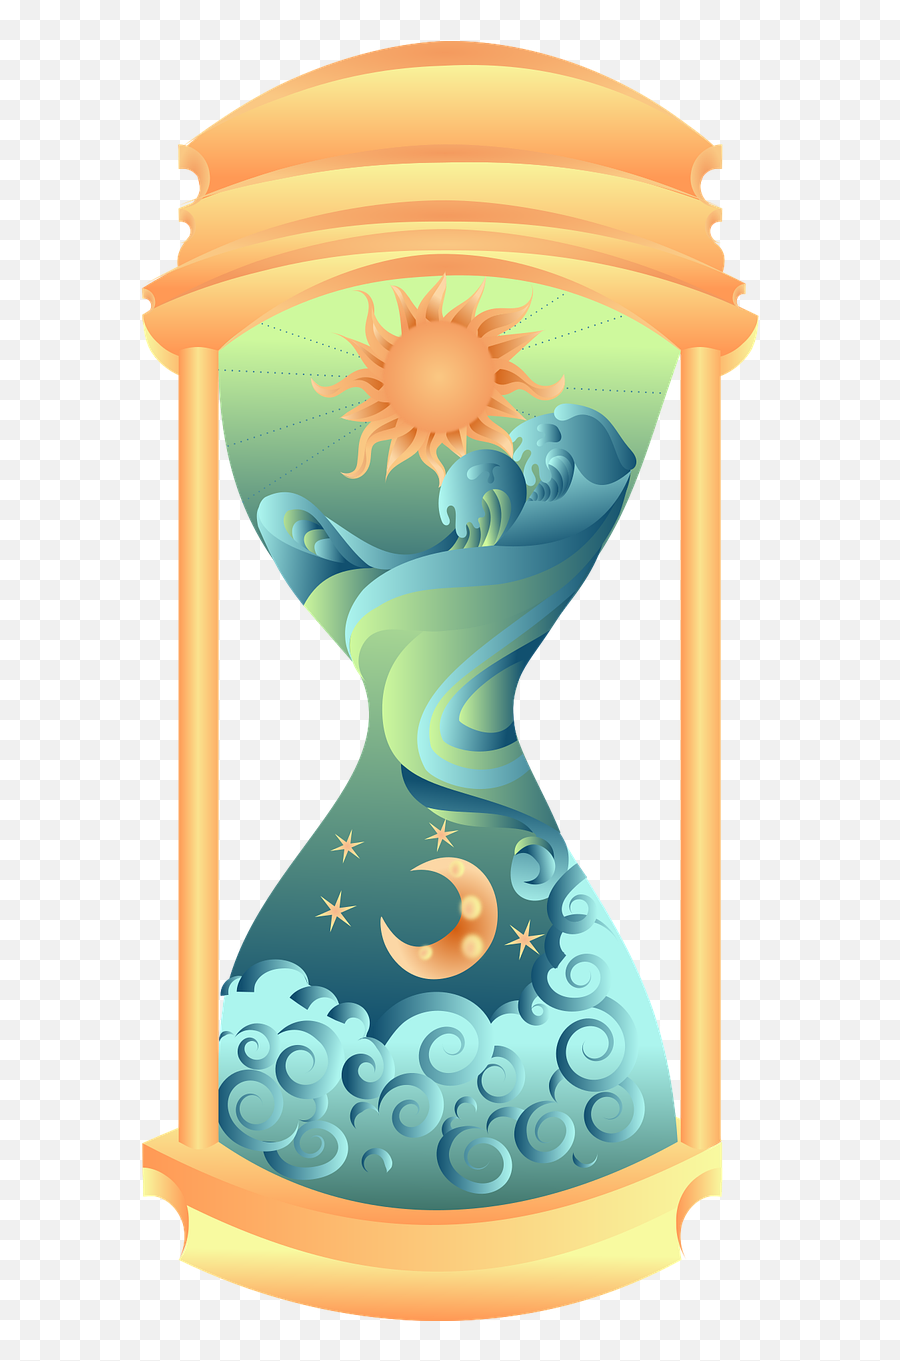 Hourglass Decorative Decoration - Free Vector Graphic On Pixabay Hourglass Png,Hourglass Icon On Transparent Background